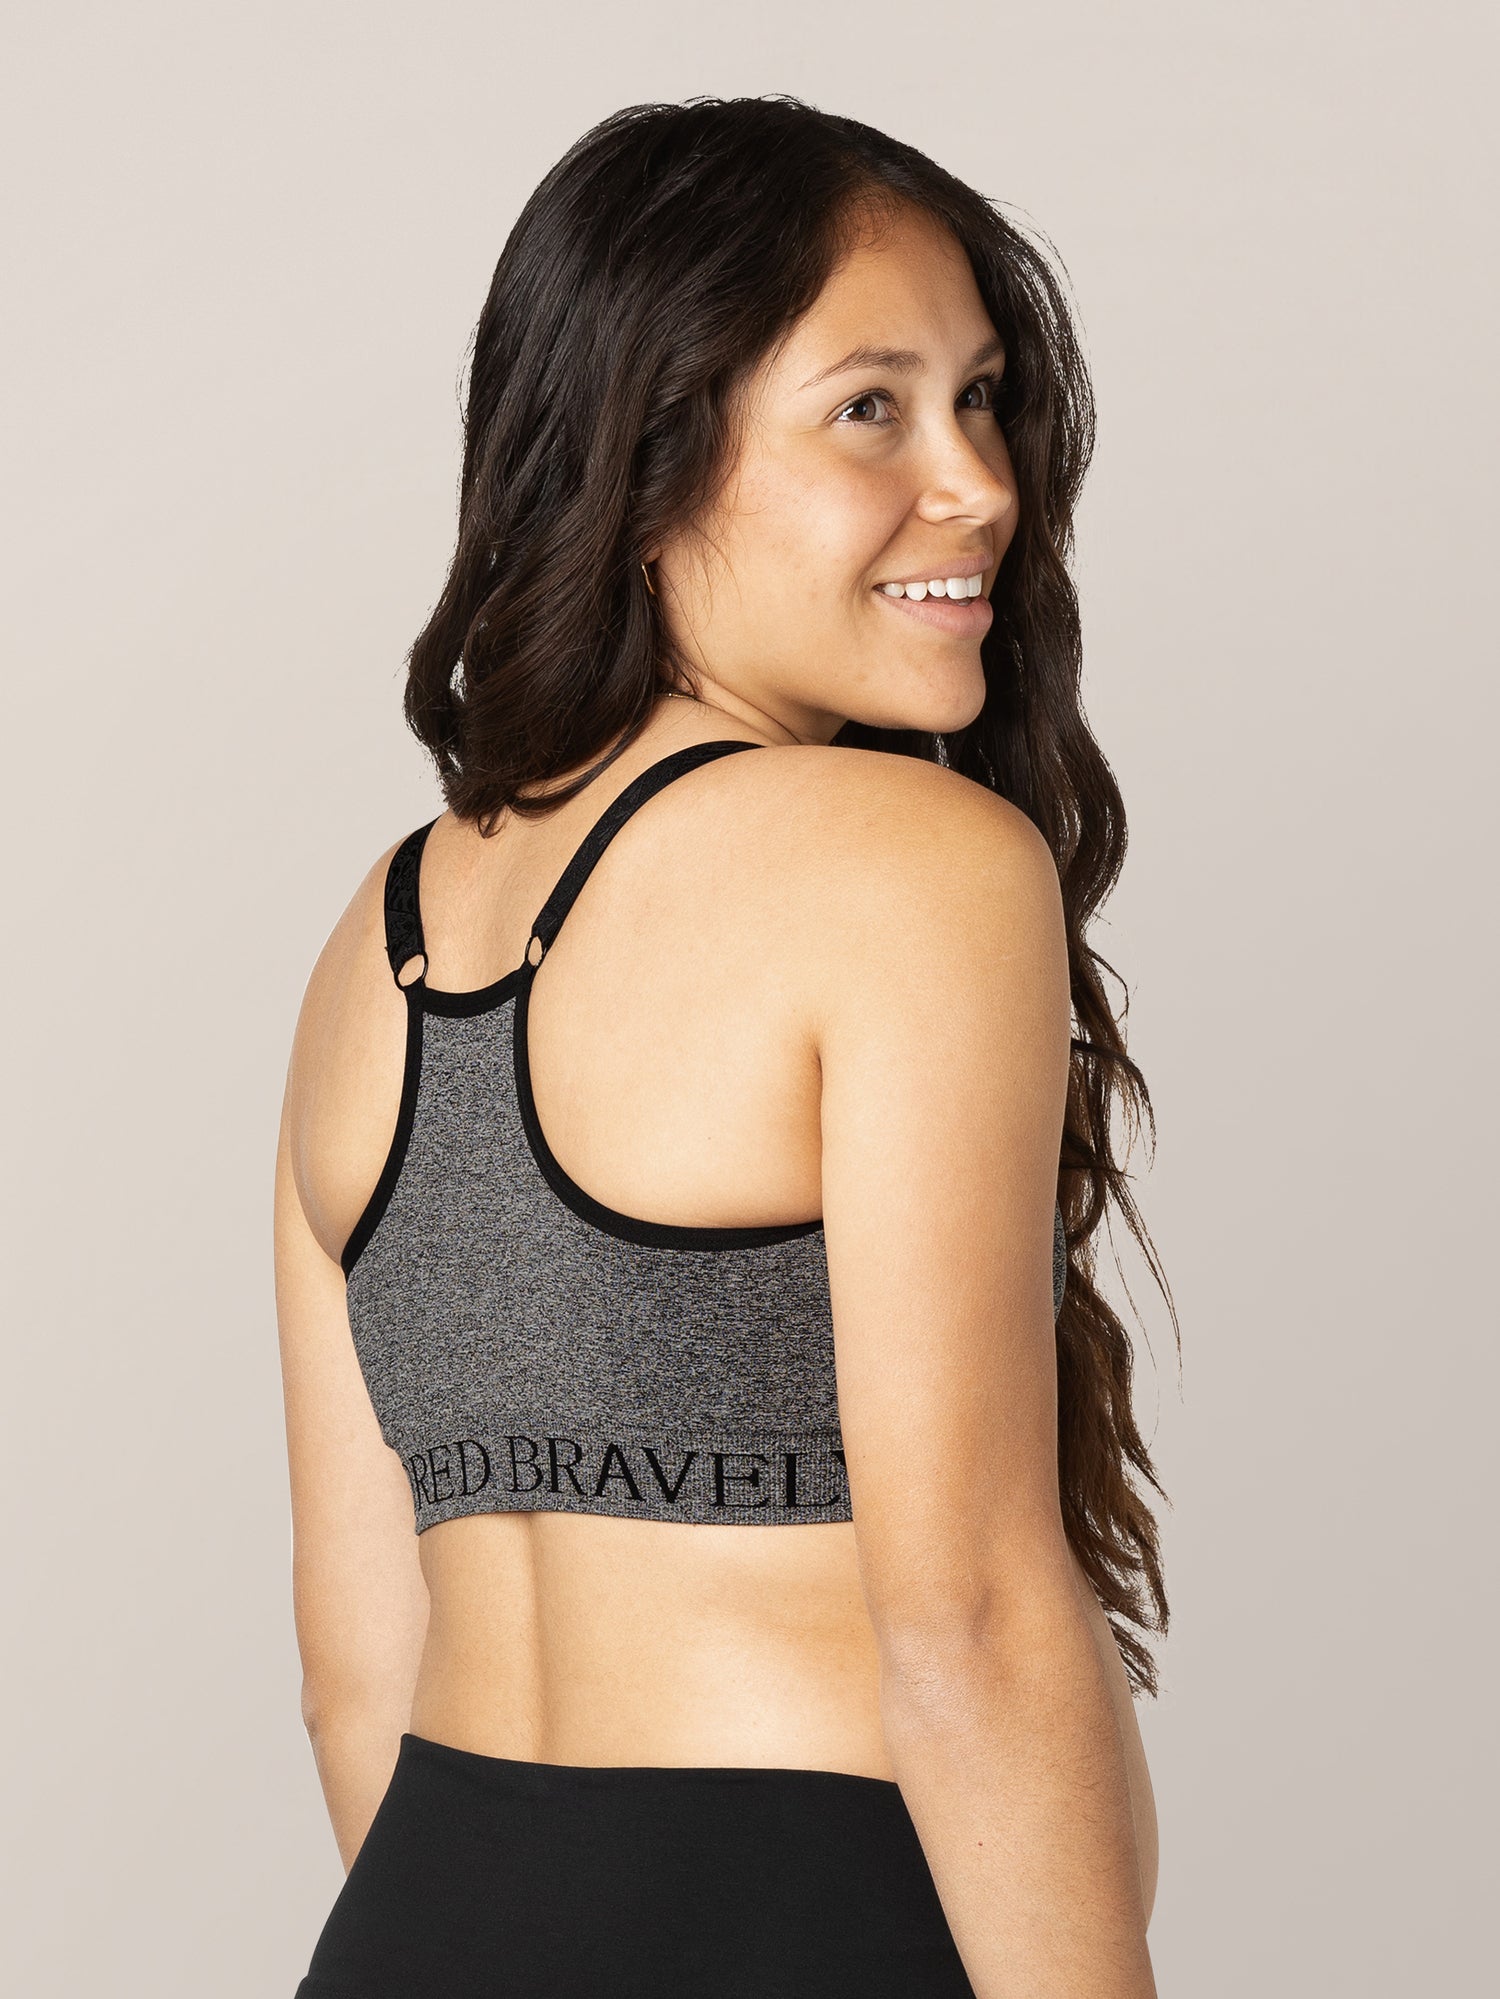 Pregnant model looking over her shoulder while wearing the Sublime® Nursing Sports Bra in Heather Grey.